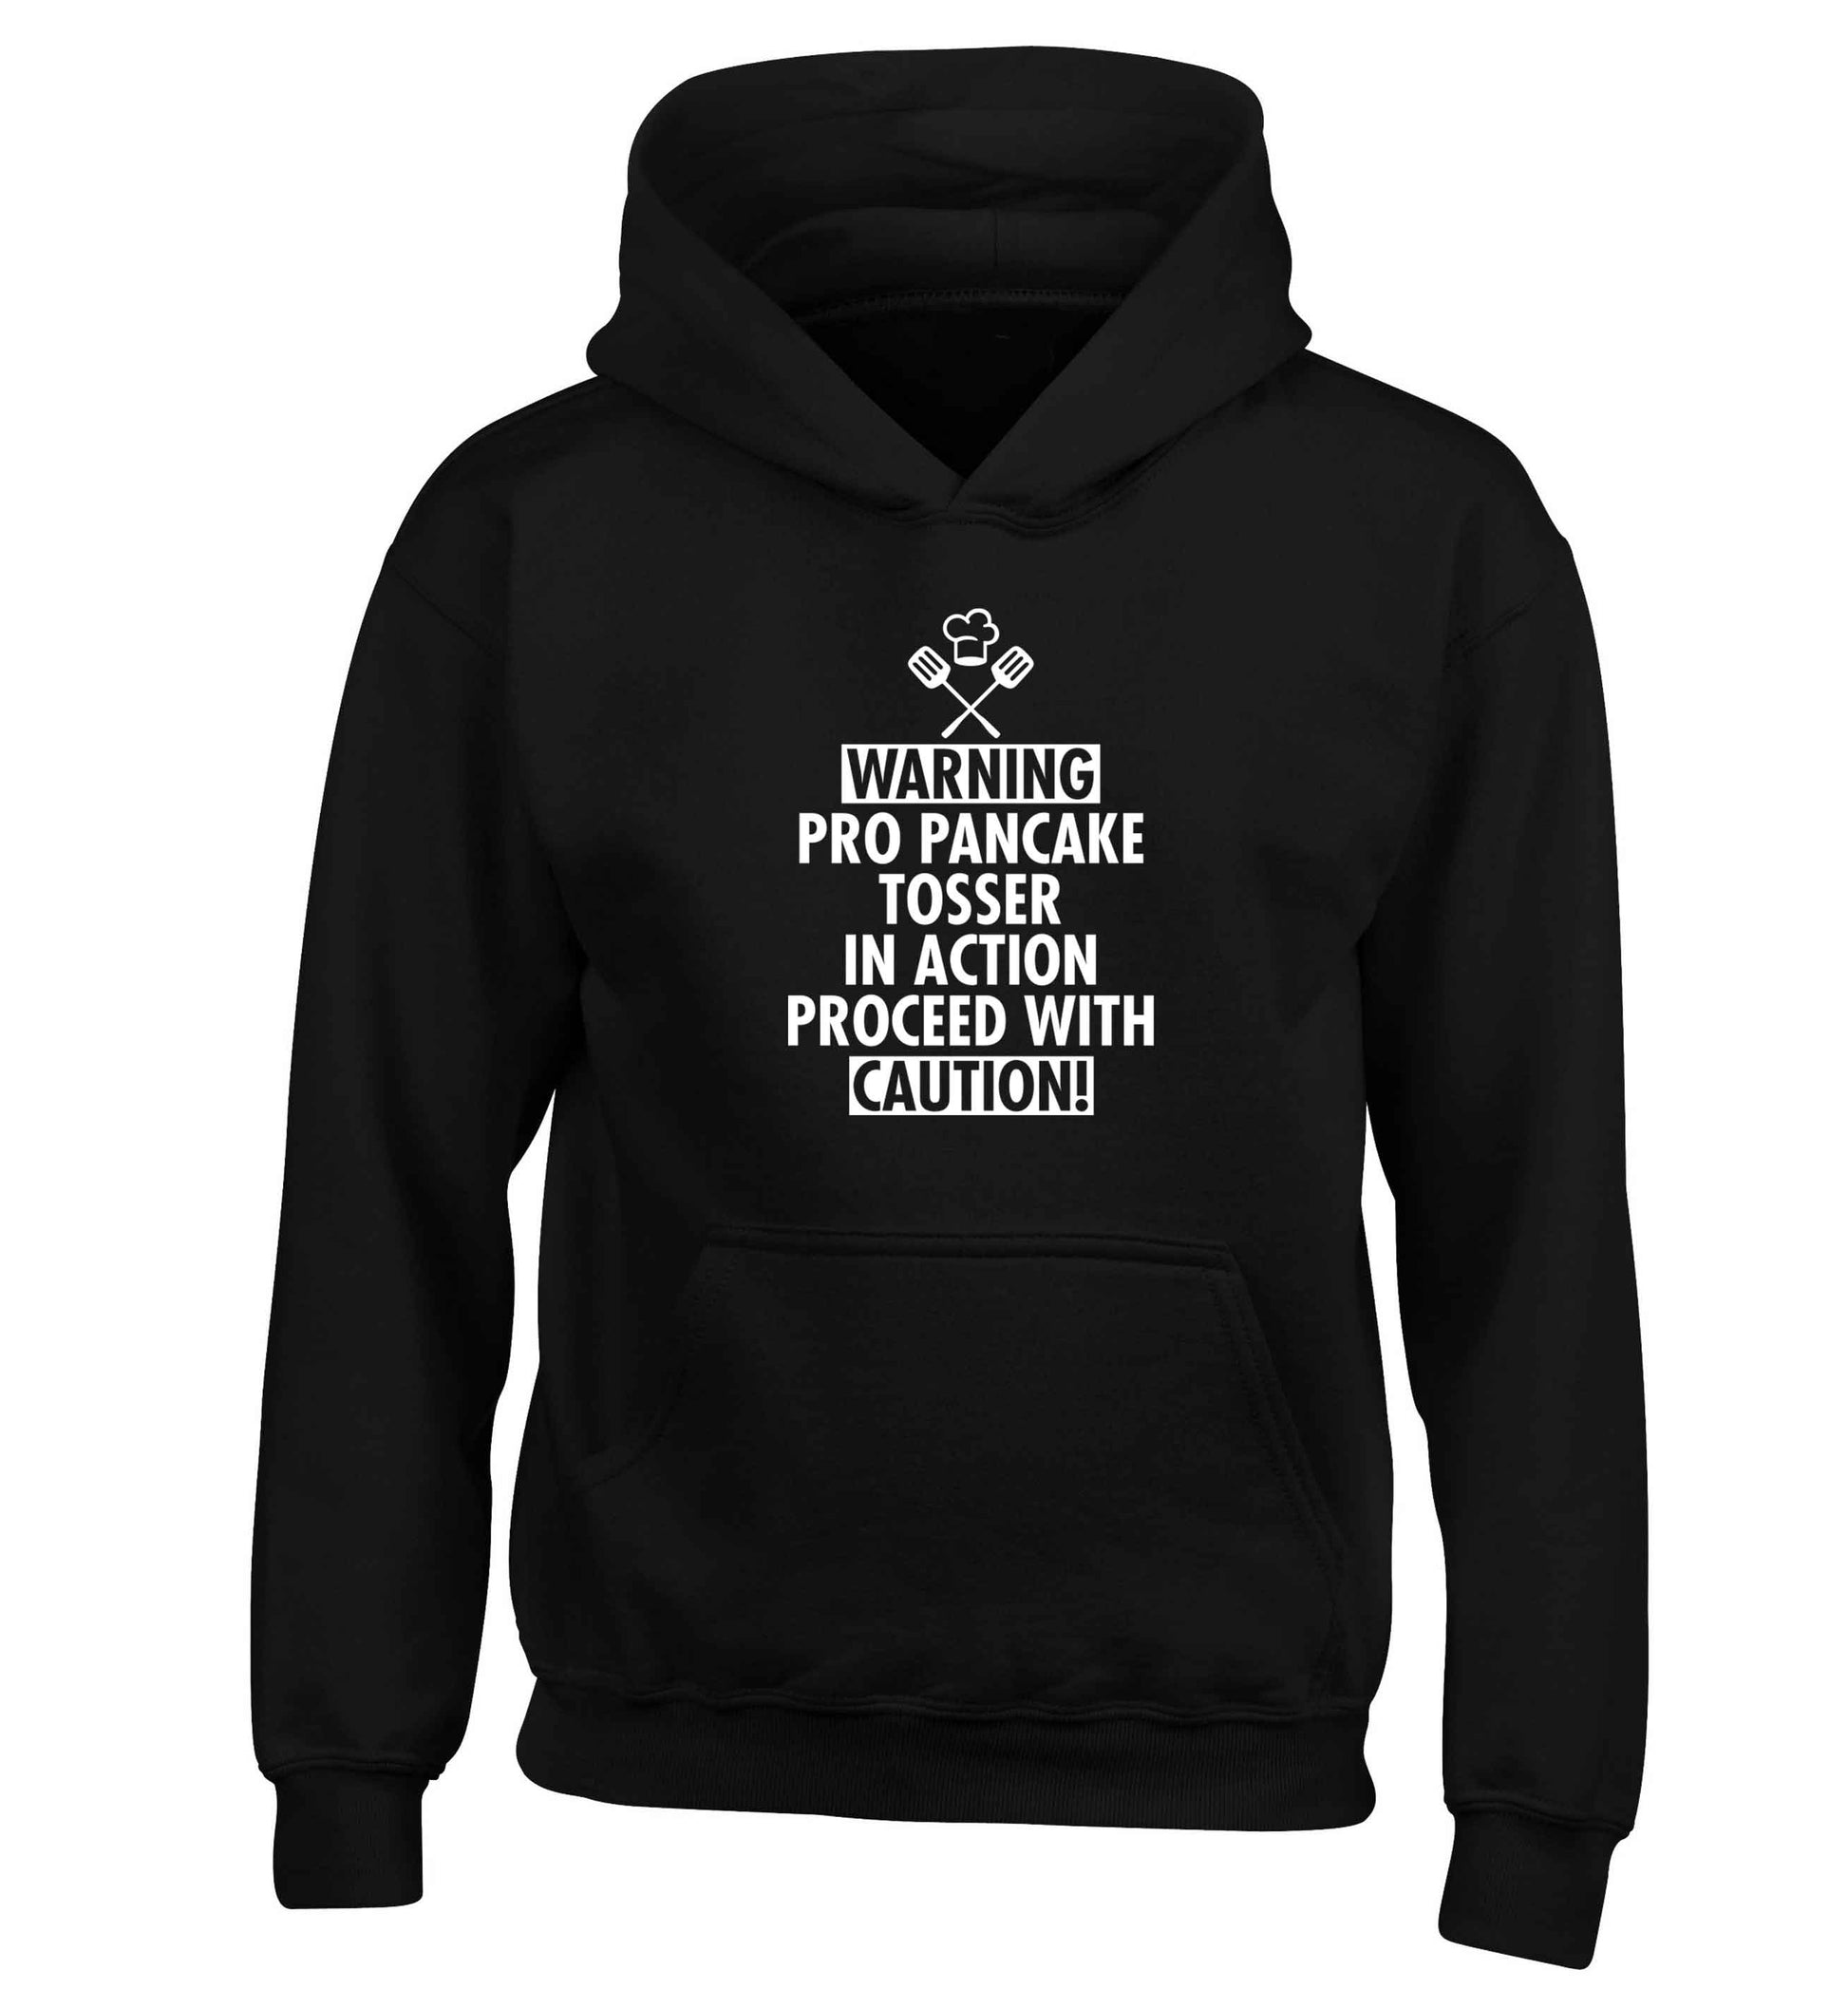 Warning pro pancake tosser in action proceed with caution children's black hoodie 12-13 Years